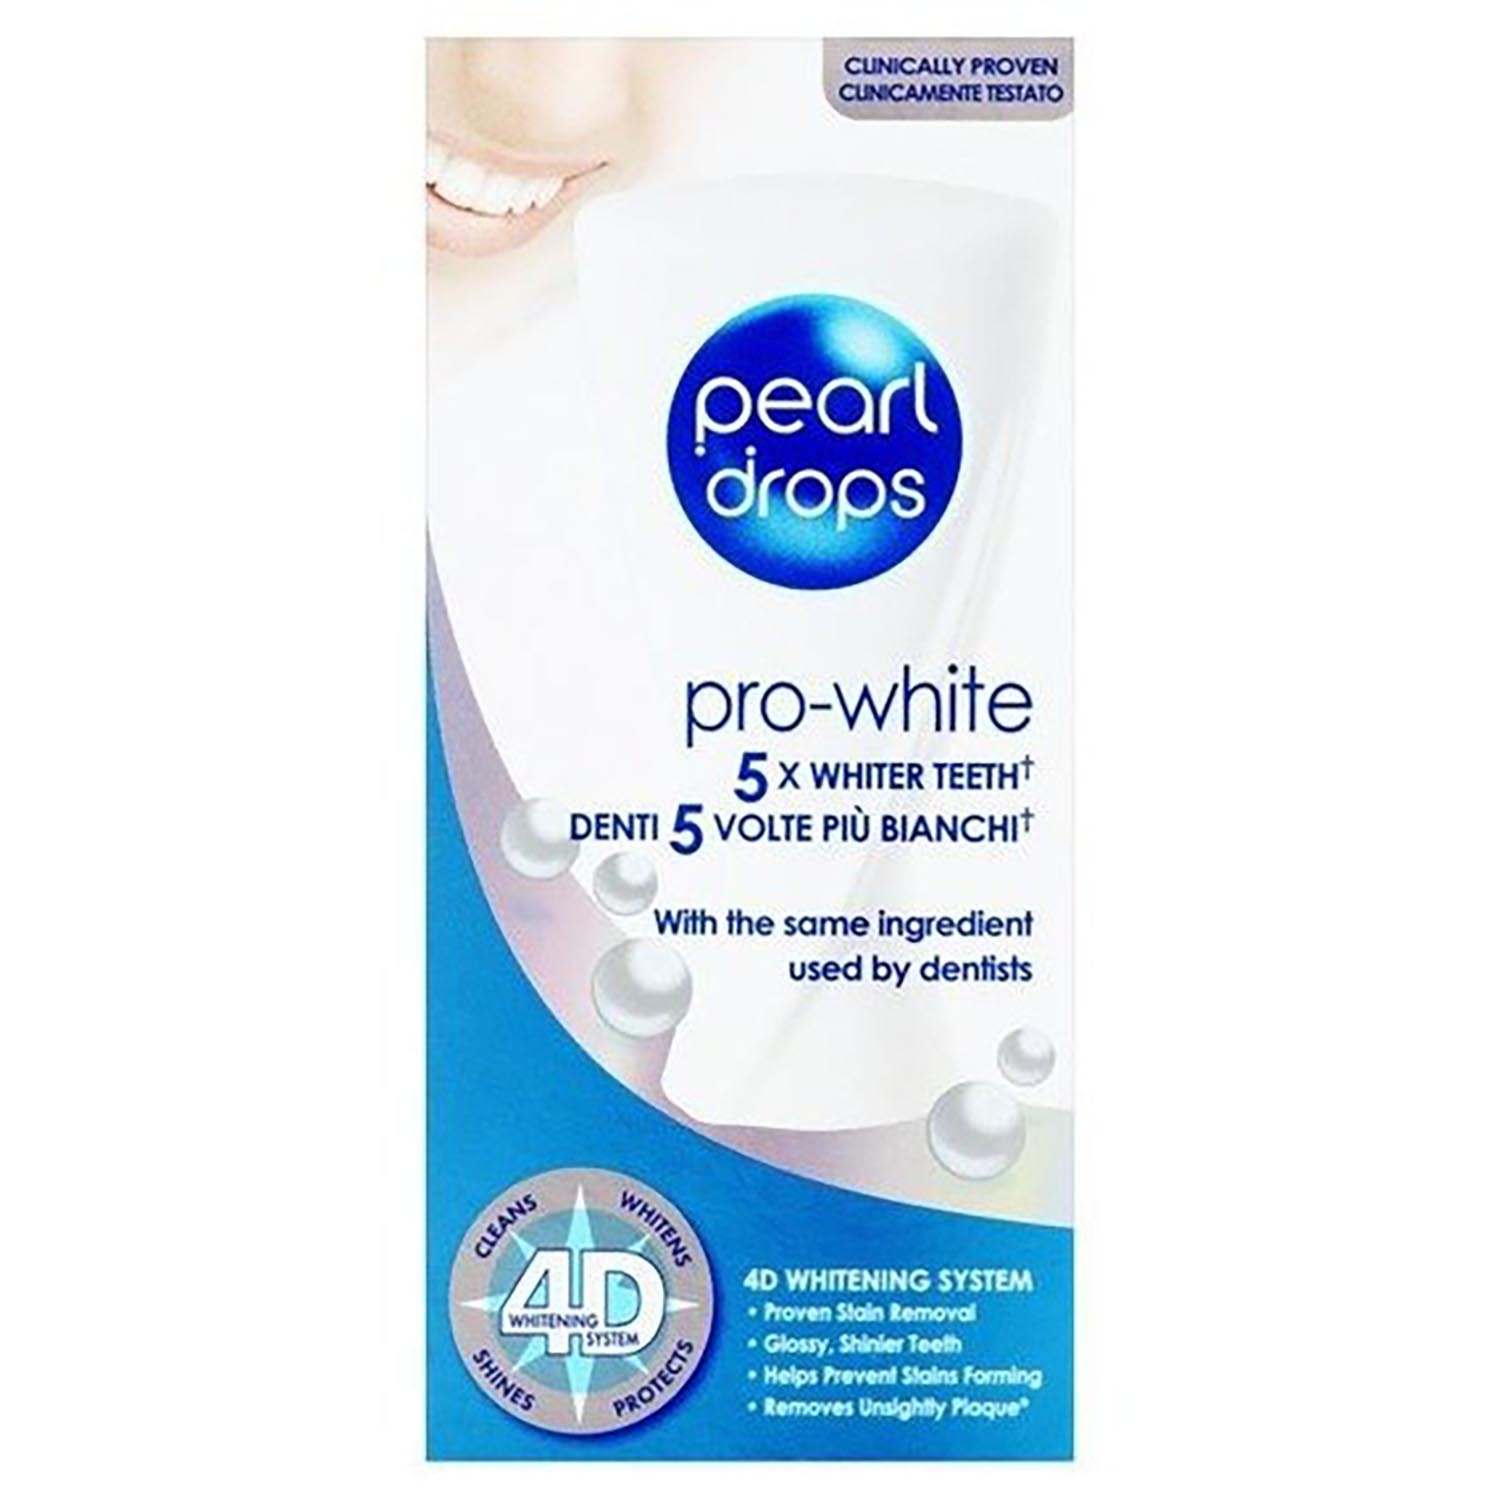 Pearl Drops Pro-White Toothpaste Image